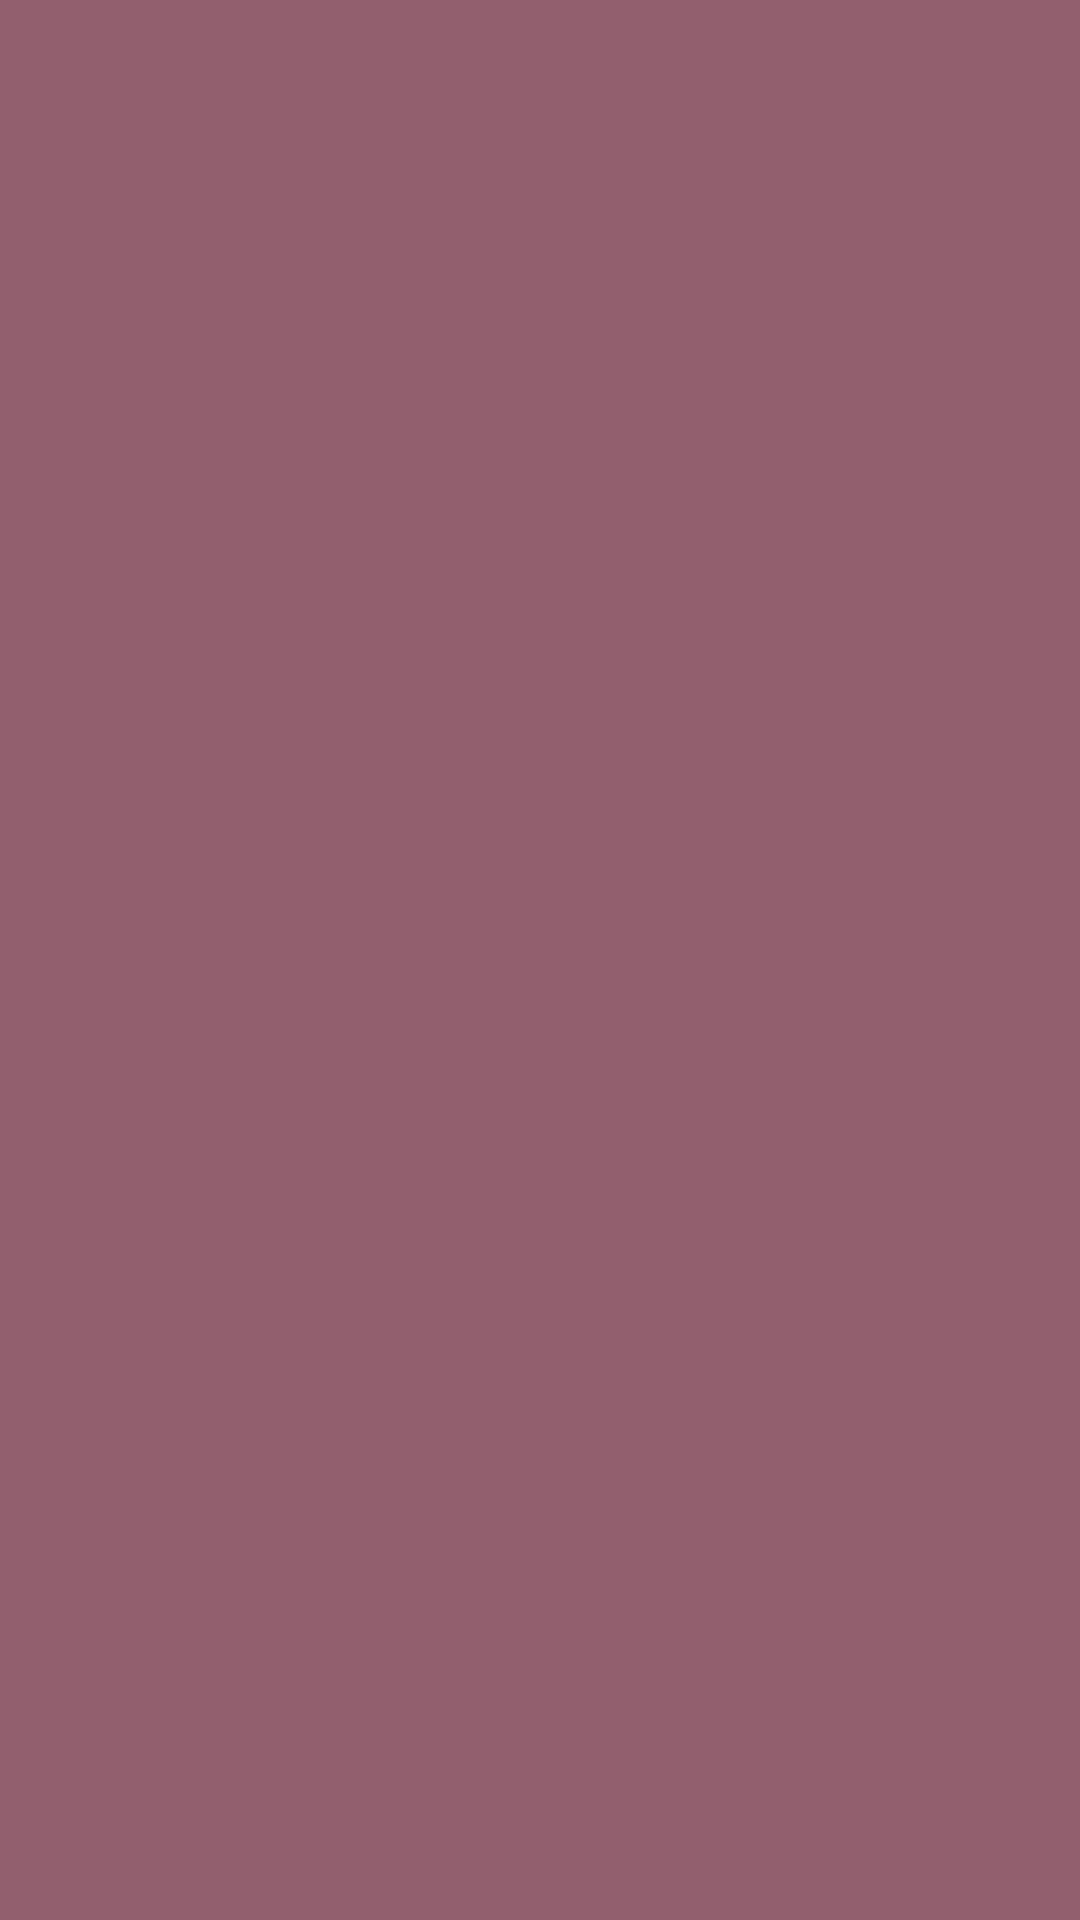 1080x1920 Raspberry Glace Solid Color Background